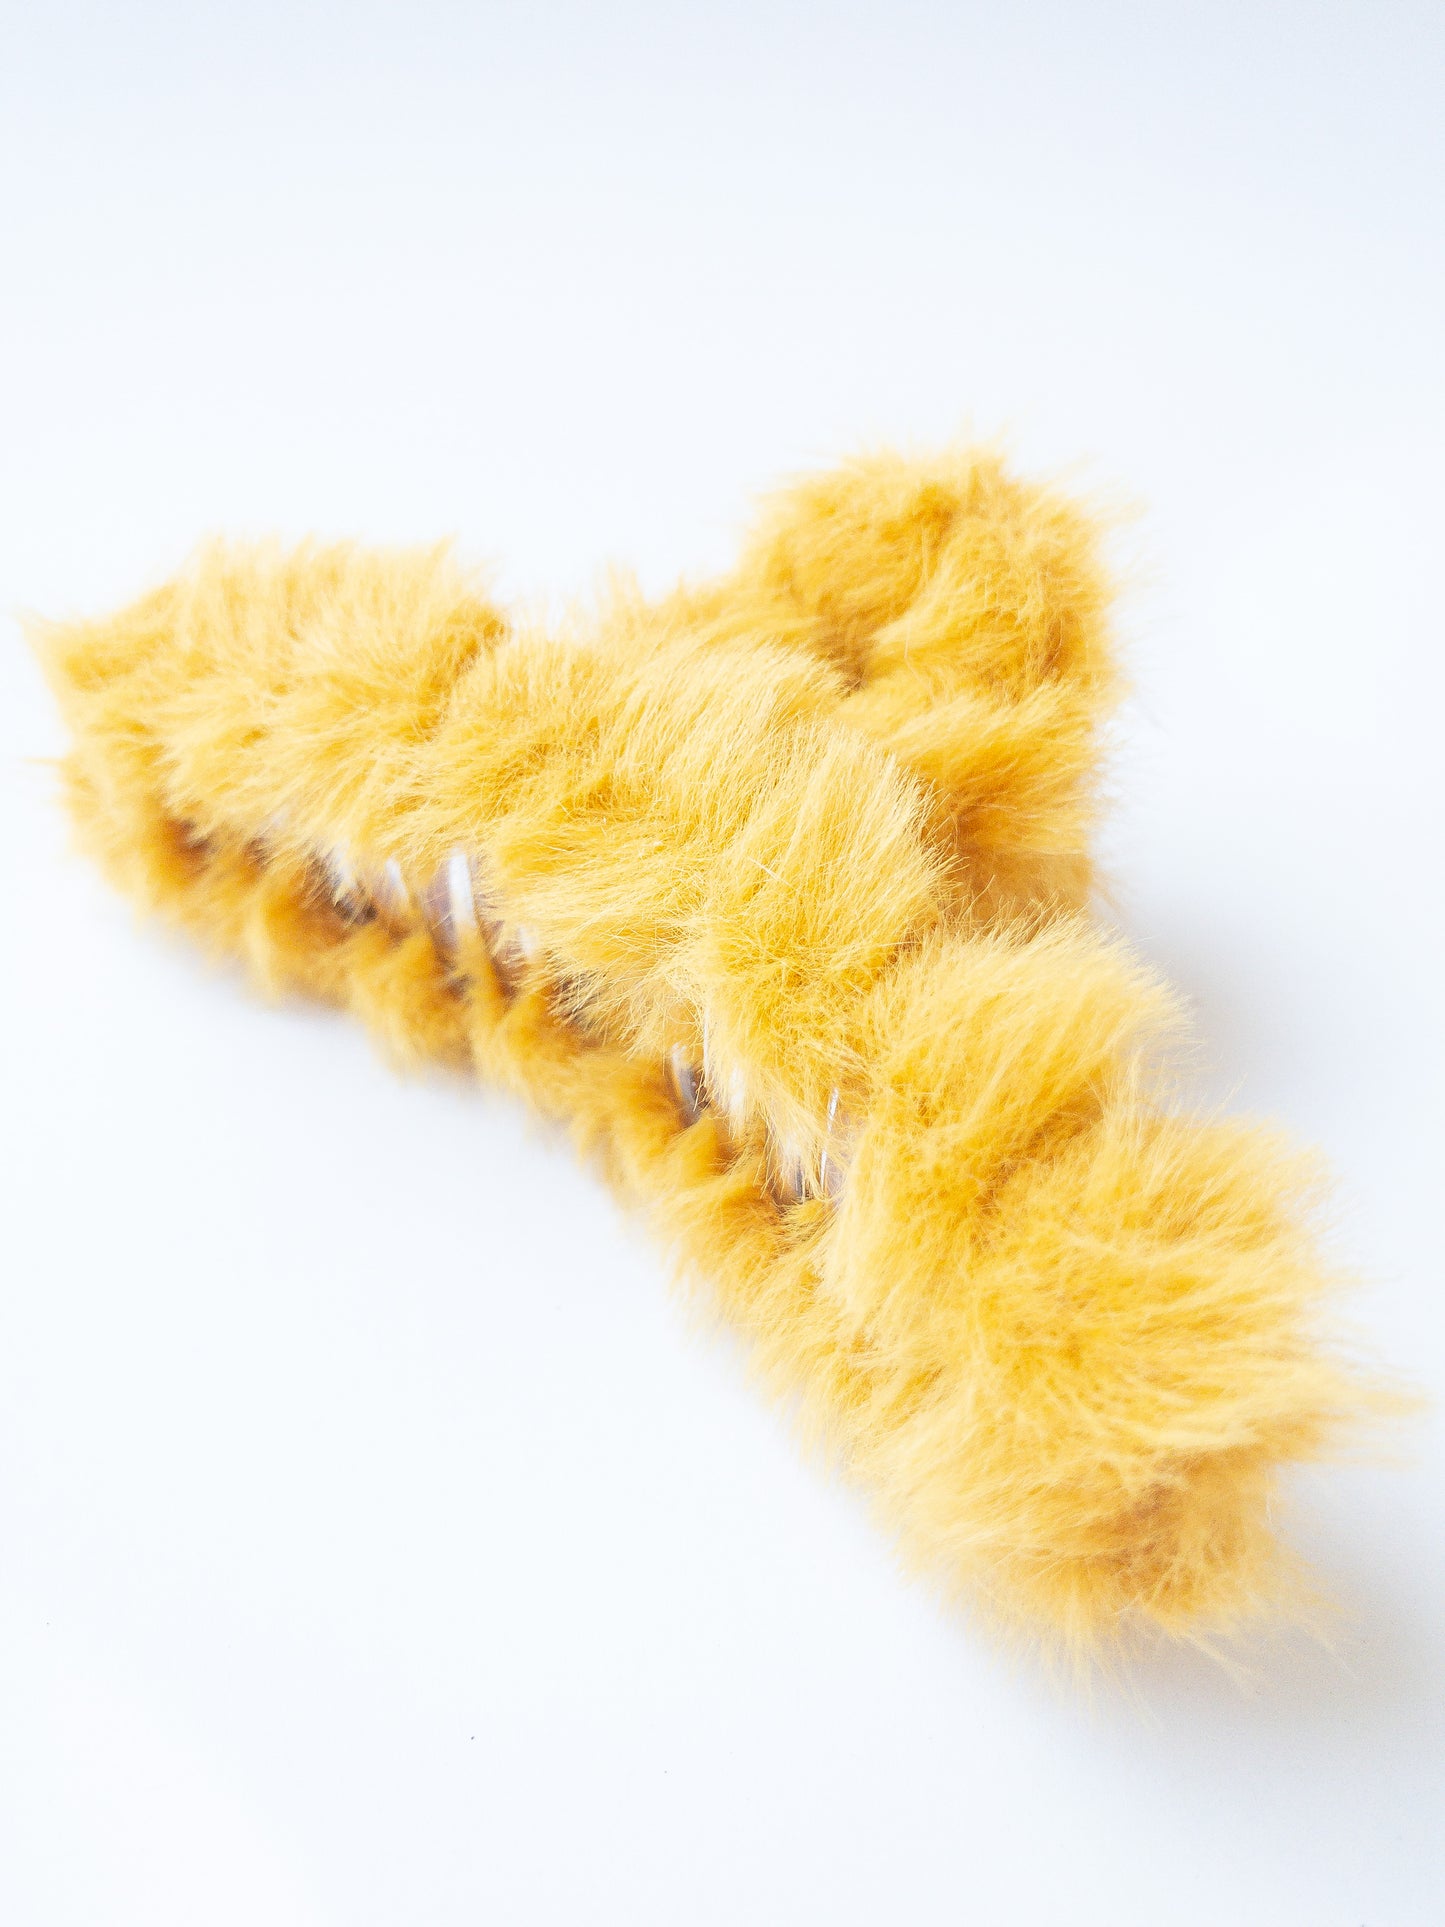 Just pure softness in a hair claw. Each transparent loop hair claw is wrapped in a furry soft yellow fabric for those easy to grab, messy hair days.